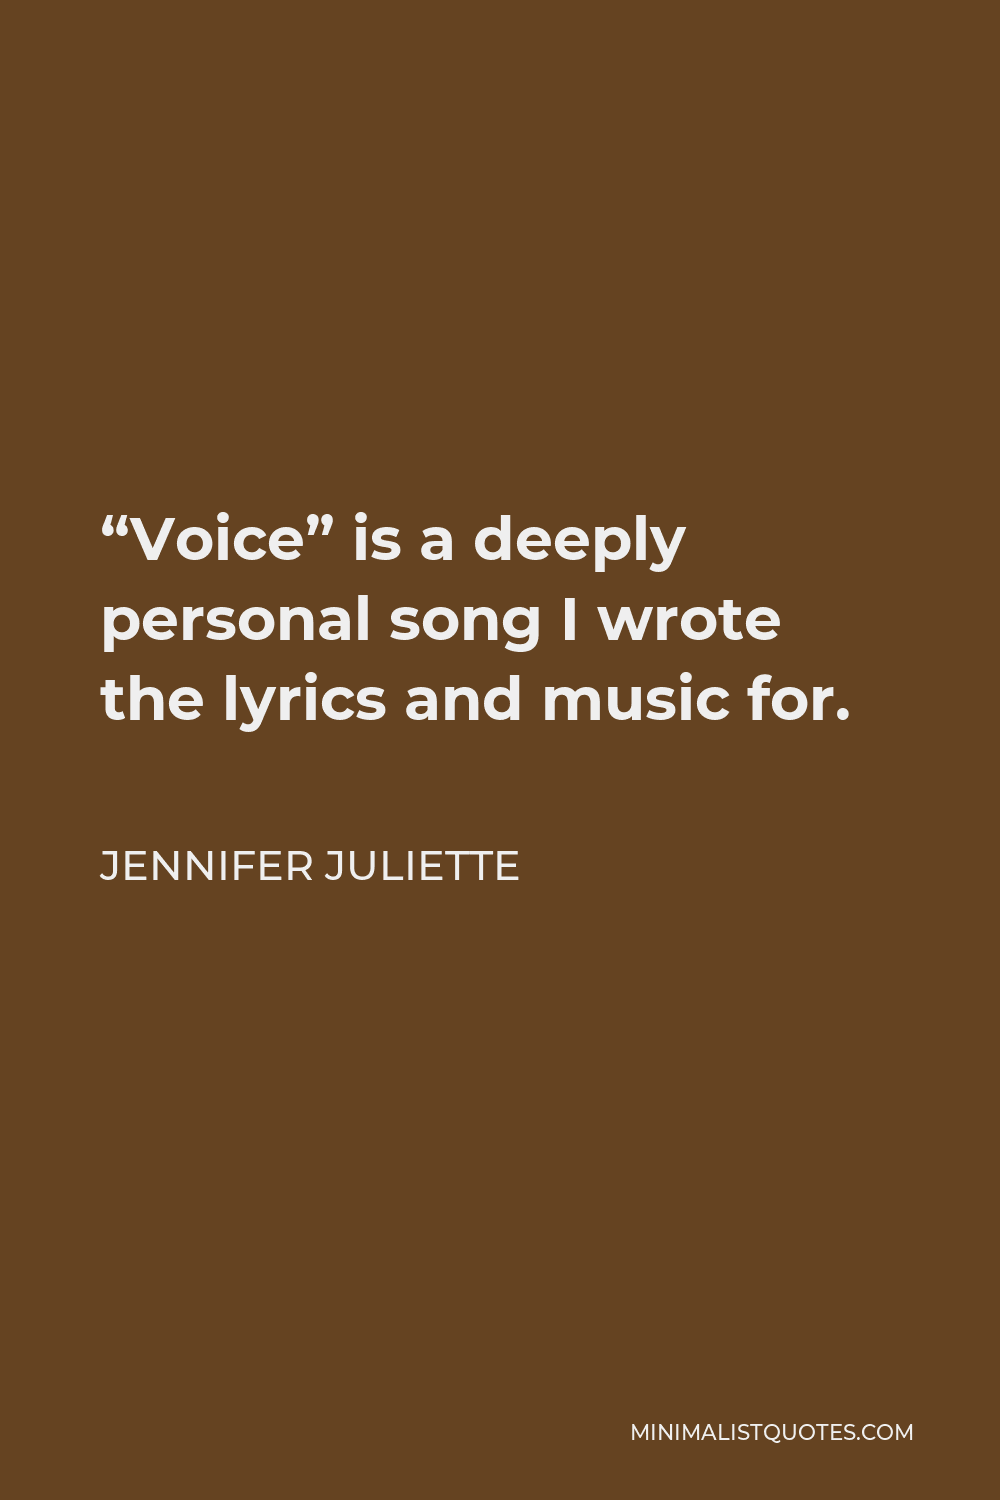 Jennifer Juliette Quote - “Voice” is a deeply personal song I wrote the lyrics and music for.